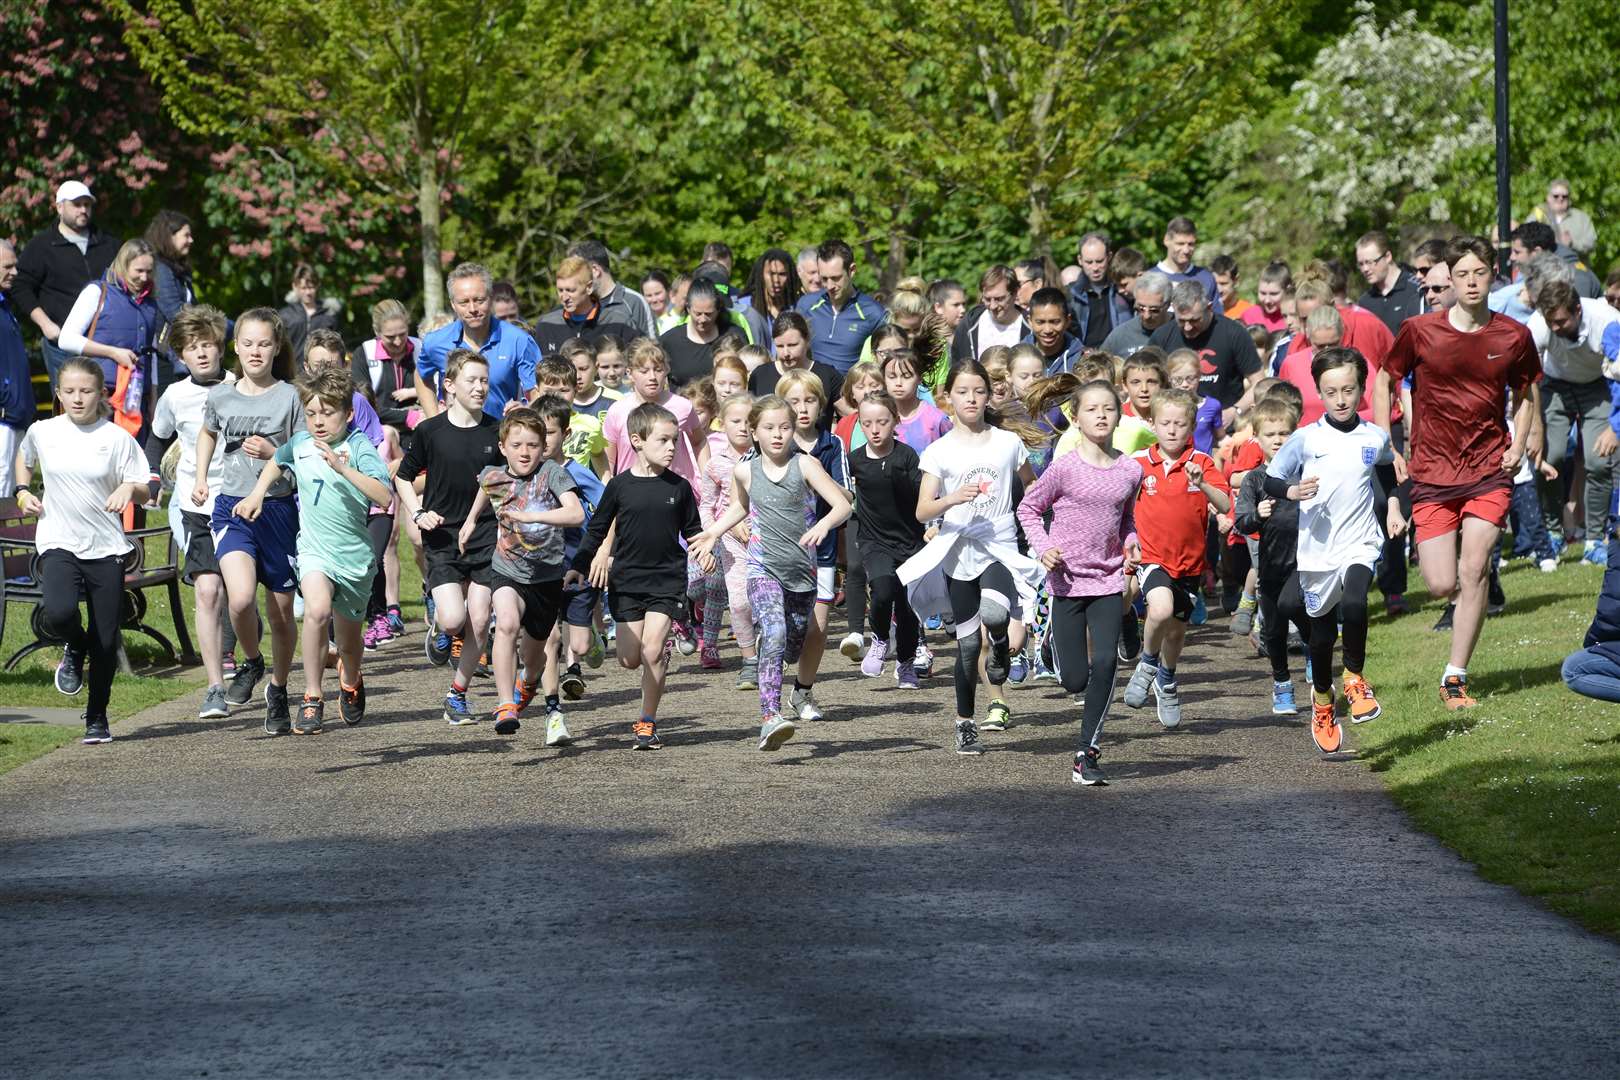 Park Runs take place most weekends across the county